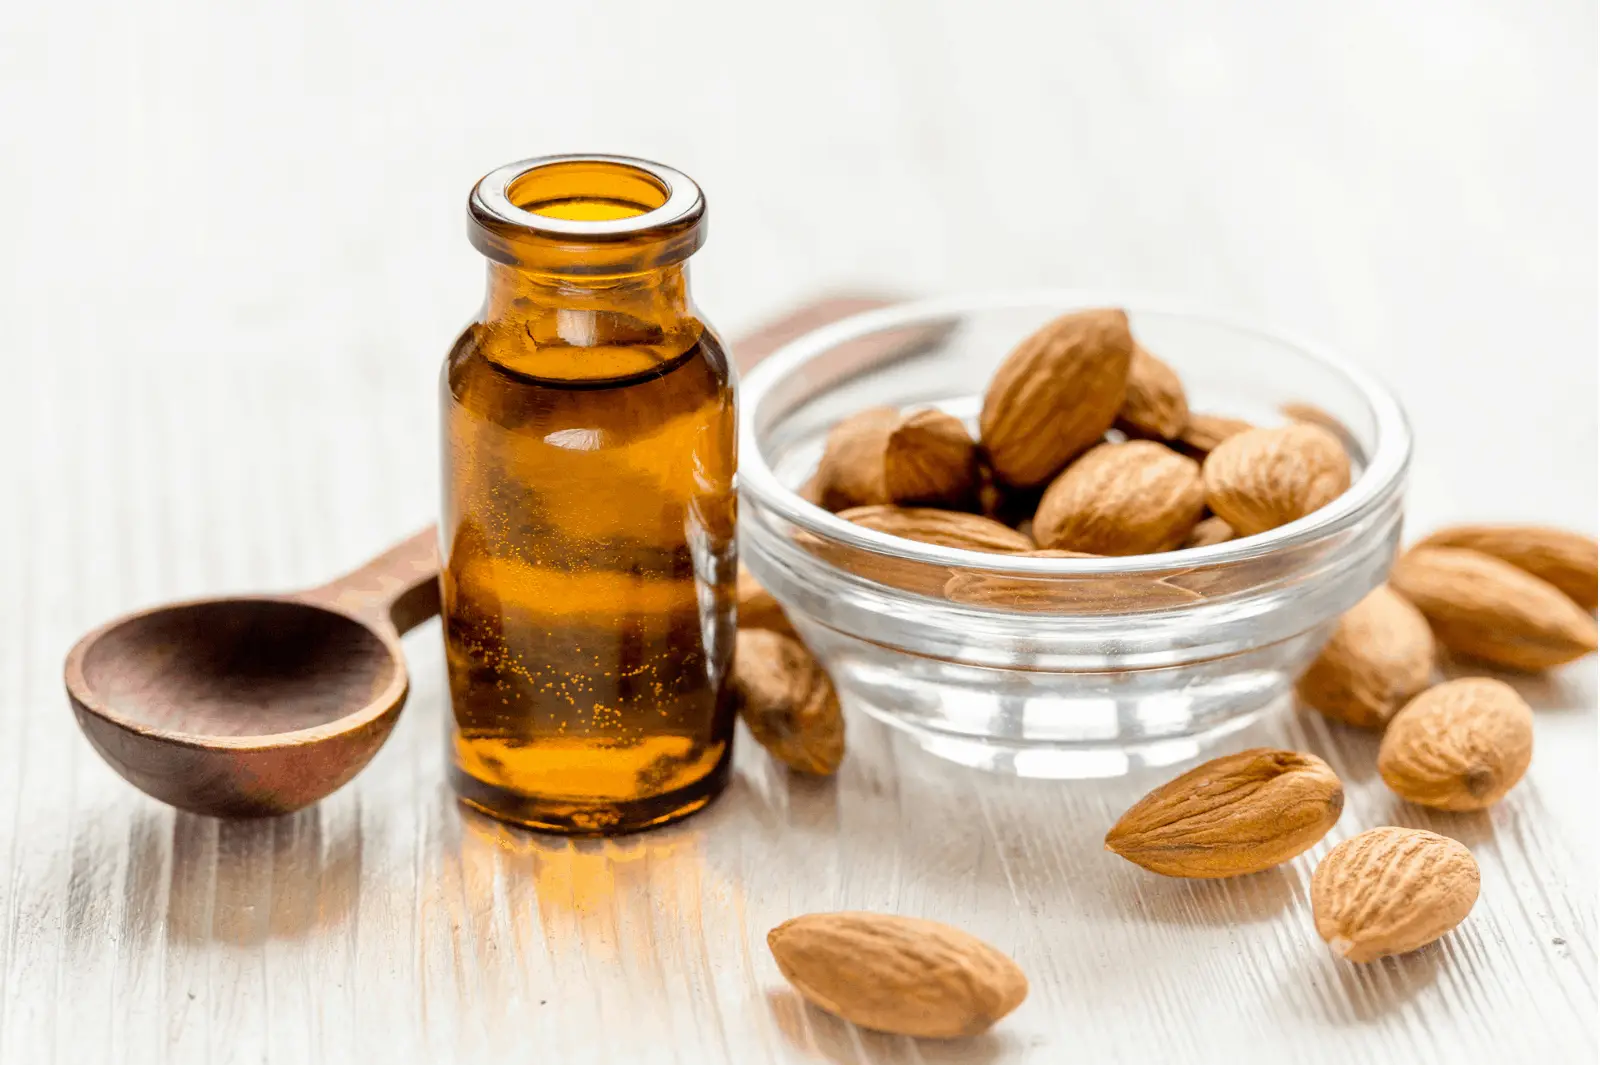 Does Almond Extract Go Bad?